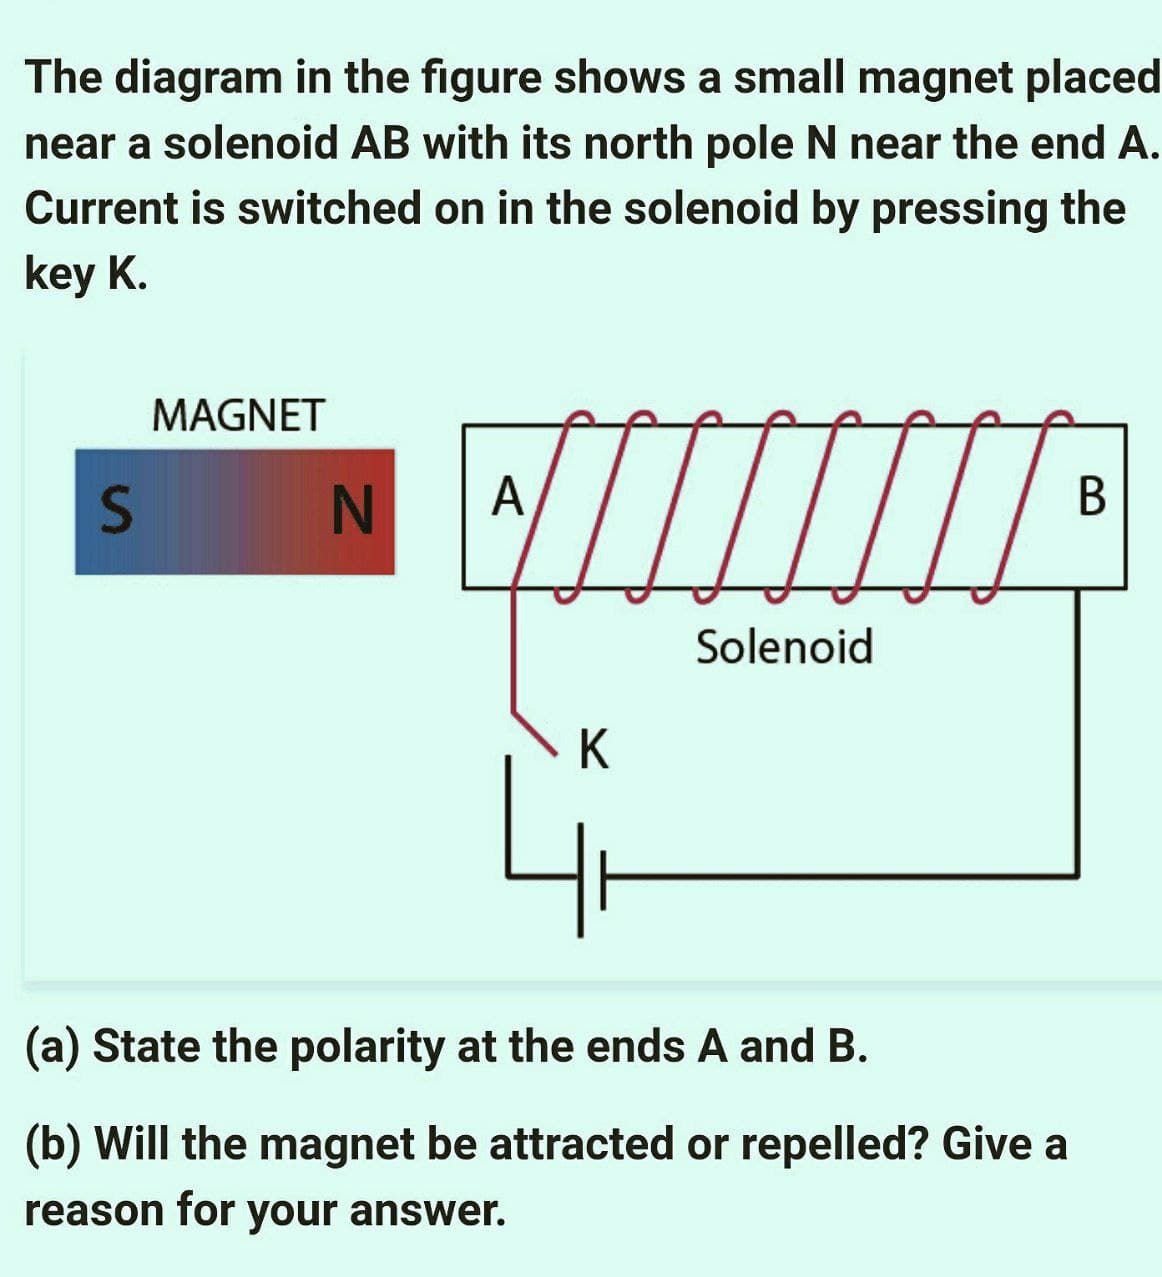 The diagram in the figure shows a small magnet placed
near a solenoid AB with its north pole N near the end A.
Current is switched on in the solenoid by pressing the
key K.
MAGNET
S
N A
B
Solenoid
K
(a) State the polarity at the ends A and B.
(b) Will the magnet be attracted or repelled? Give a
reason for your answer.